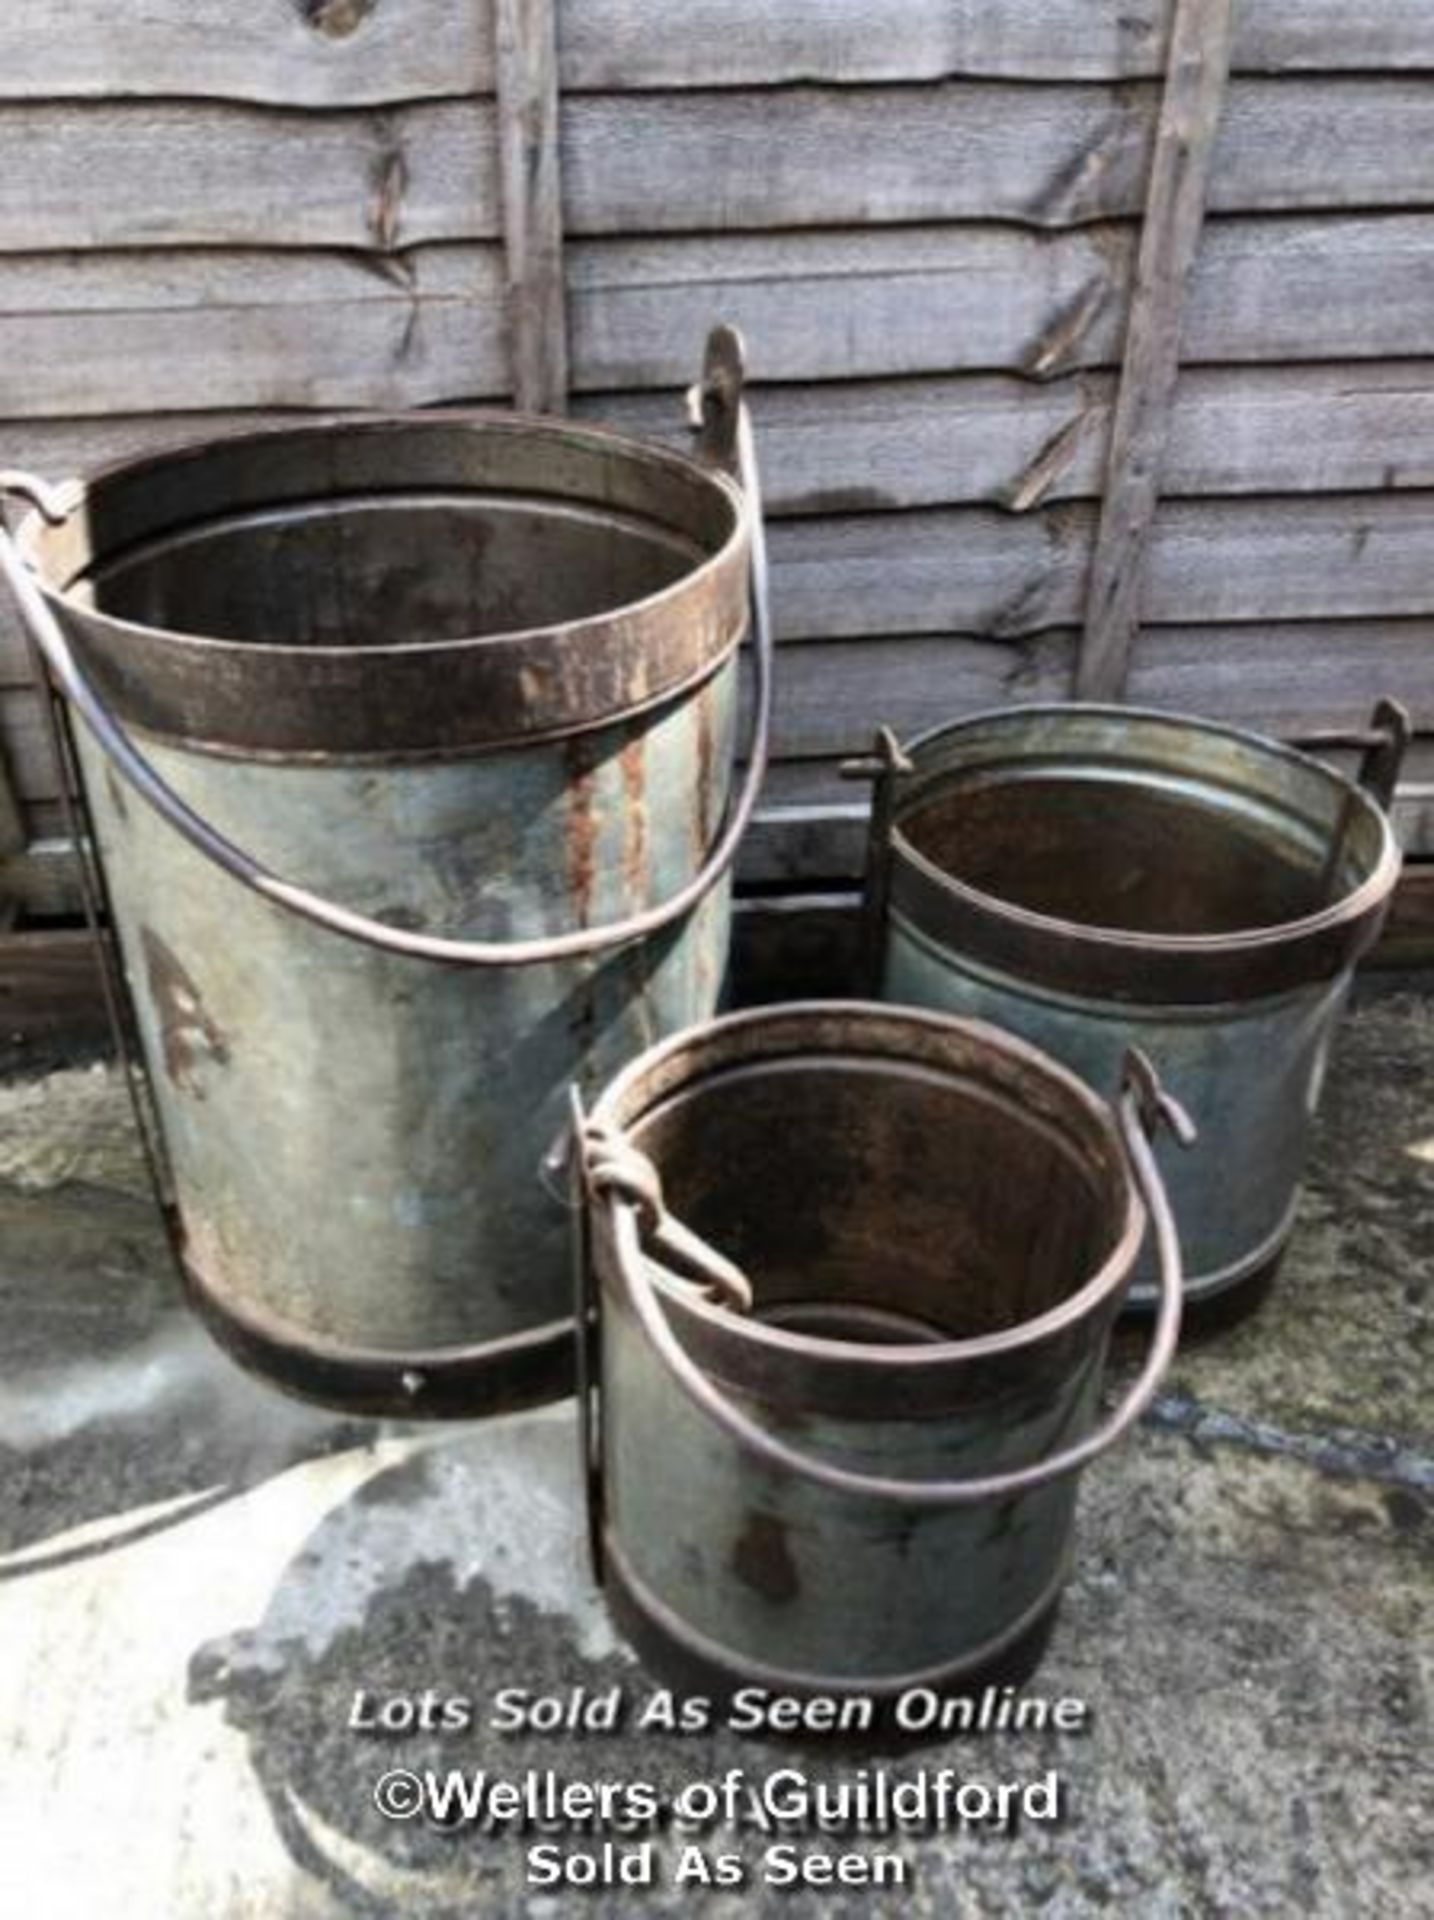 *3XMILK CHURN BUCKETS WITH HANDLES25CM (H) X 40CM (DIA)/ cOLLECT FROM WELLERS AUCTIONS GU14SJ¦